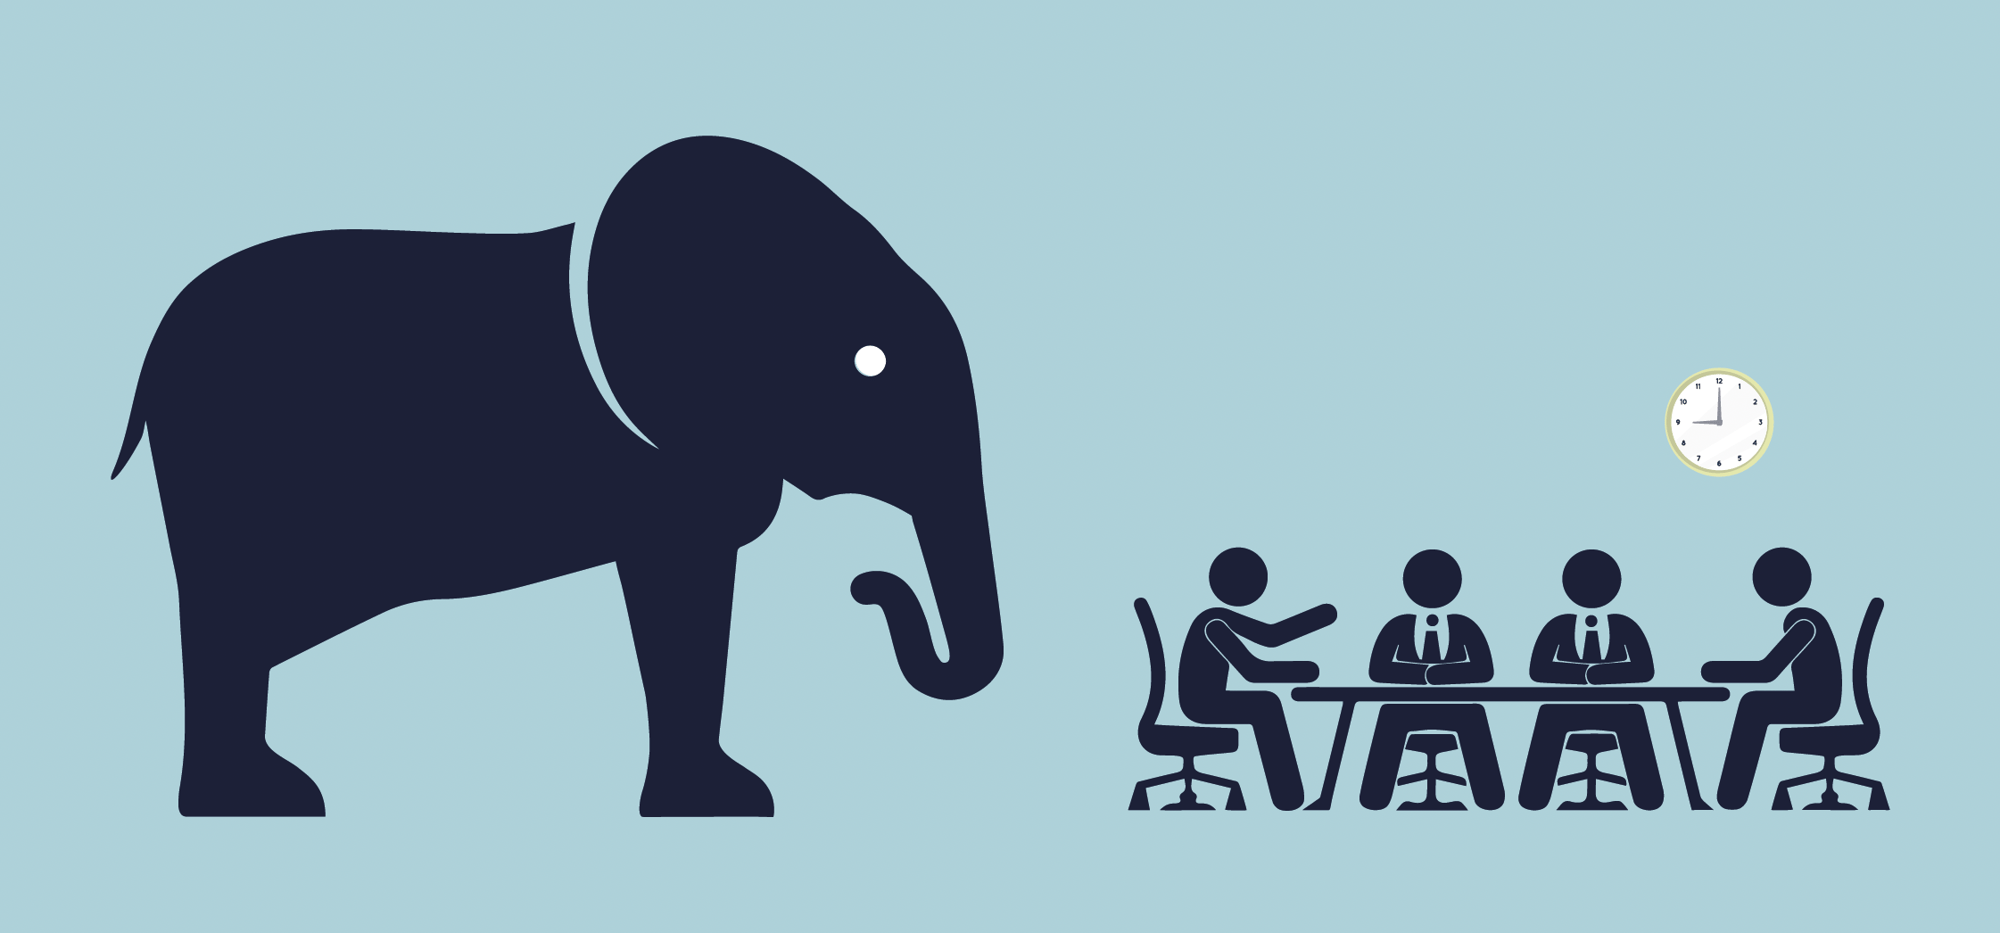 Cybersecurity Elephant in the room by PLINK